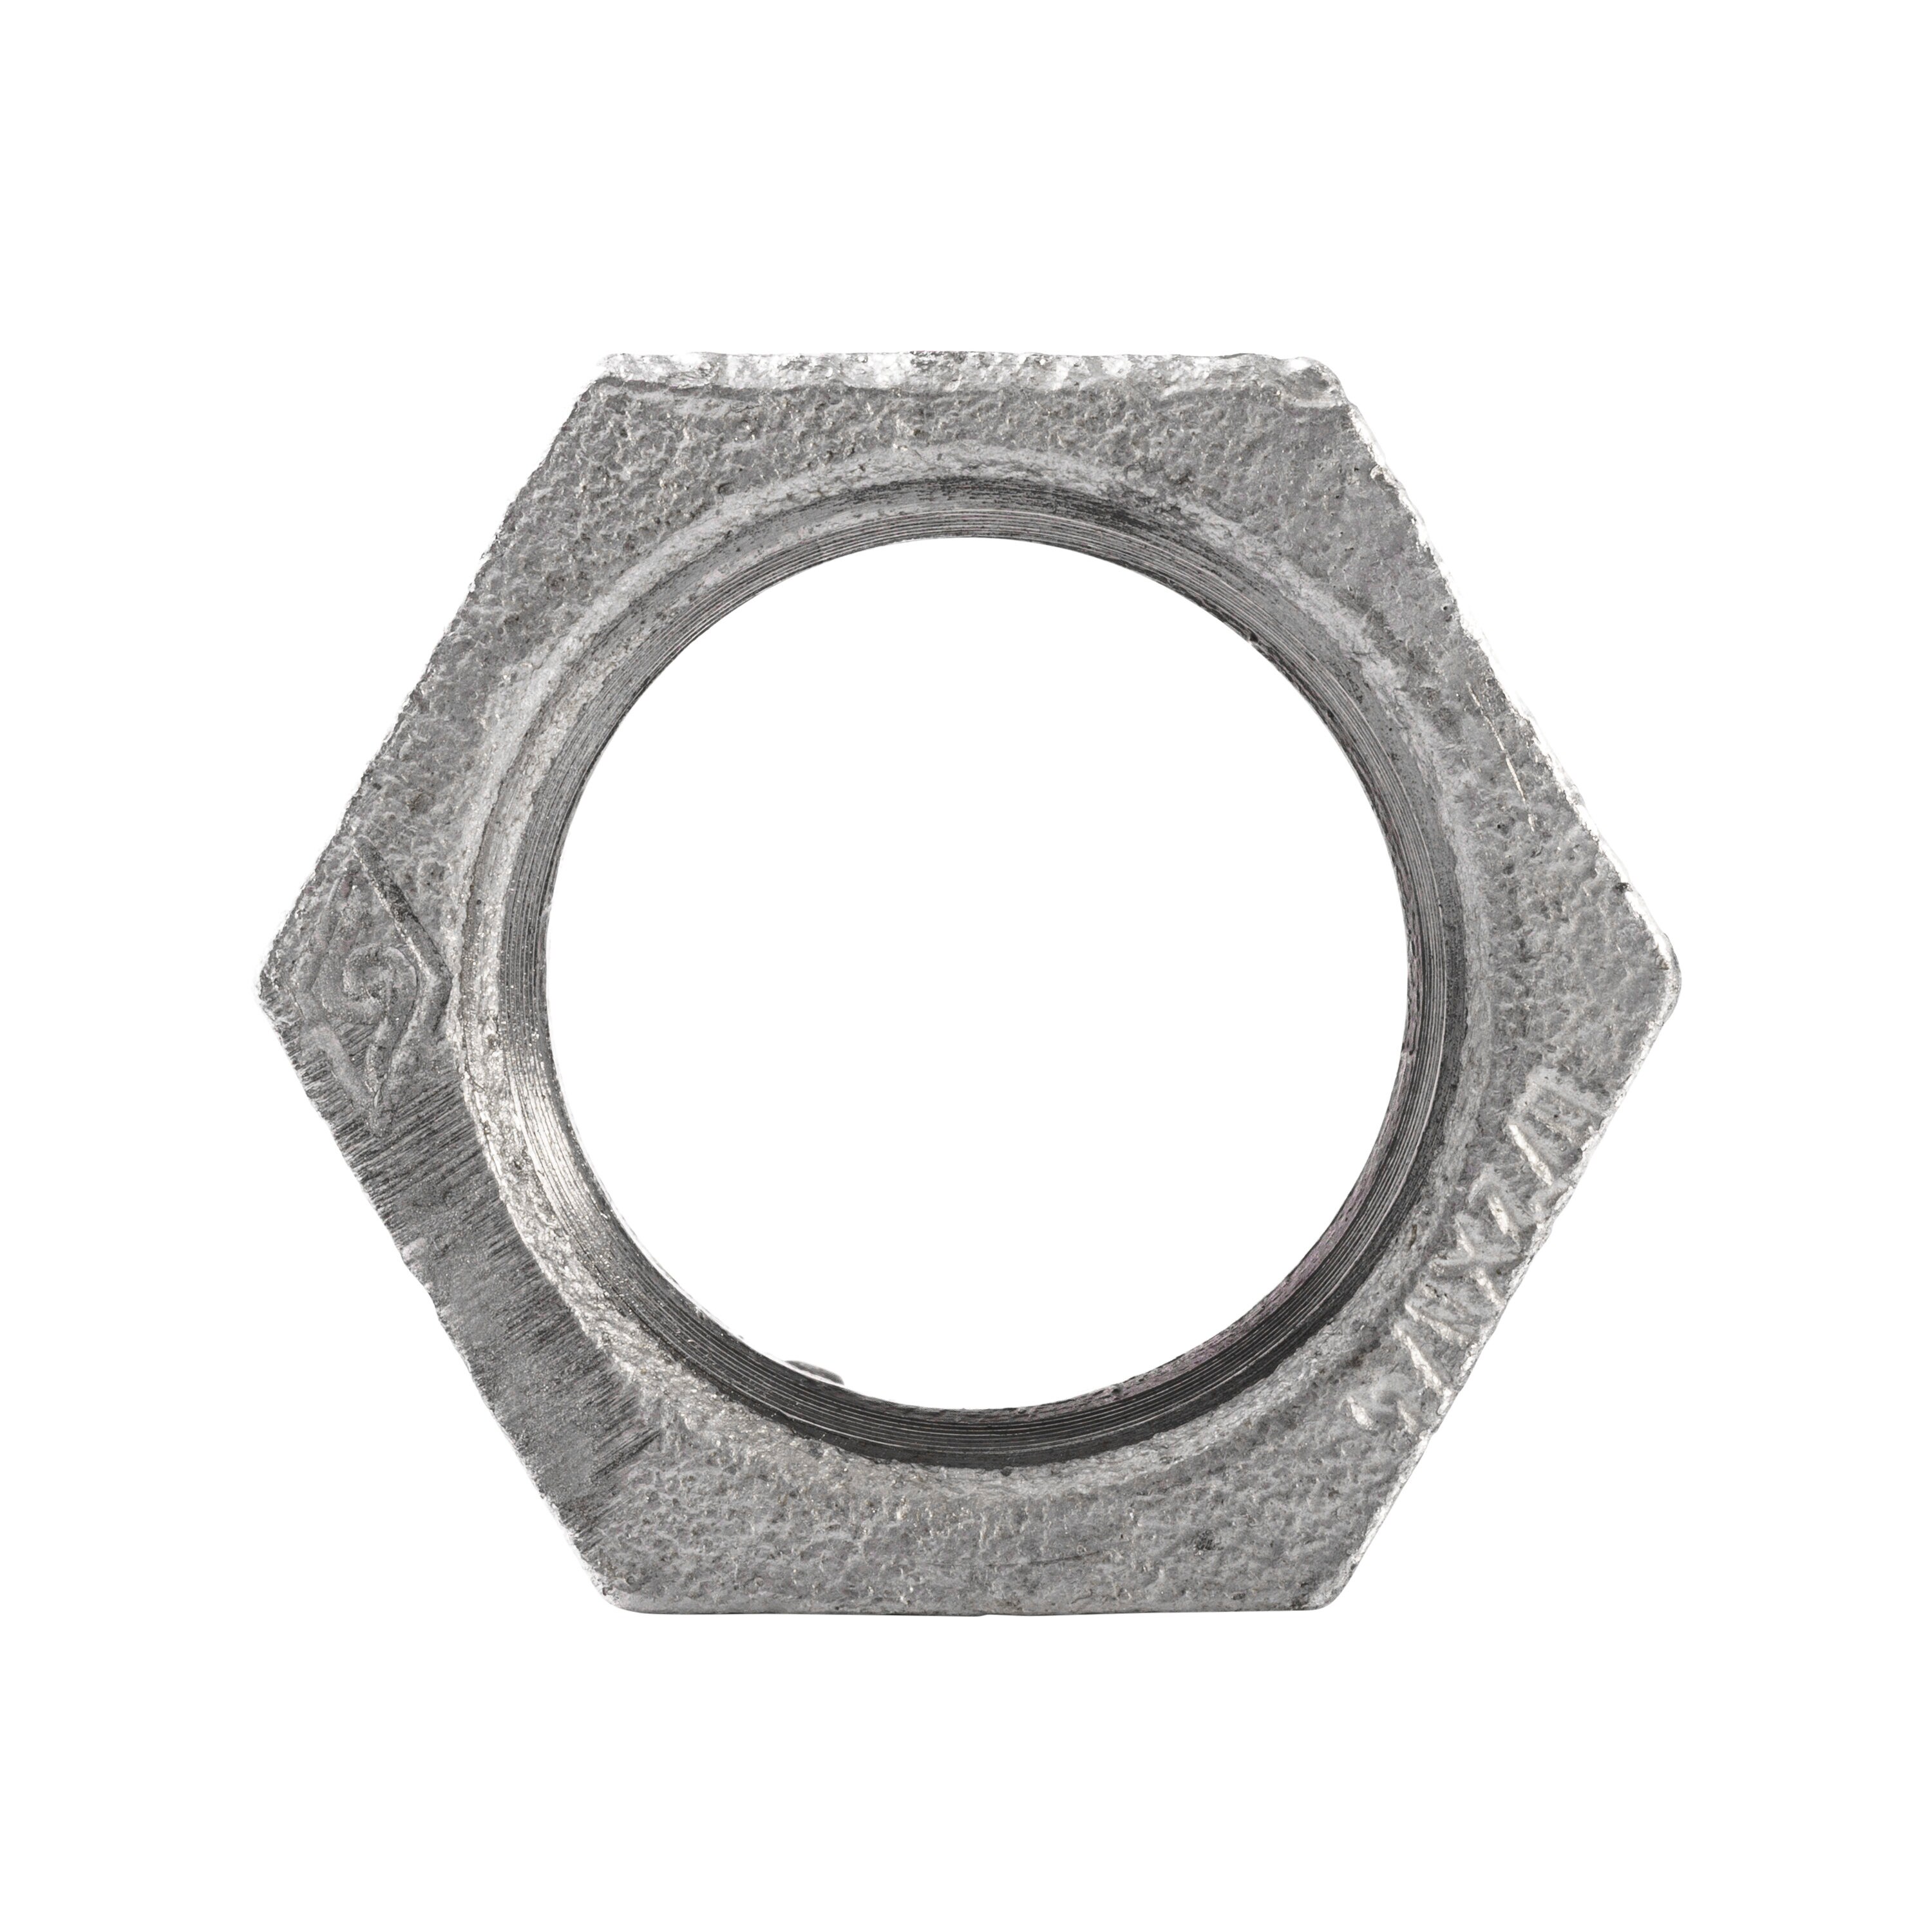 1-1/4-in in RELIABILT the Bushing x Hex at 1-1/2-in Galvanized & Galvanized Pipe Fittings department